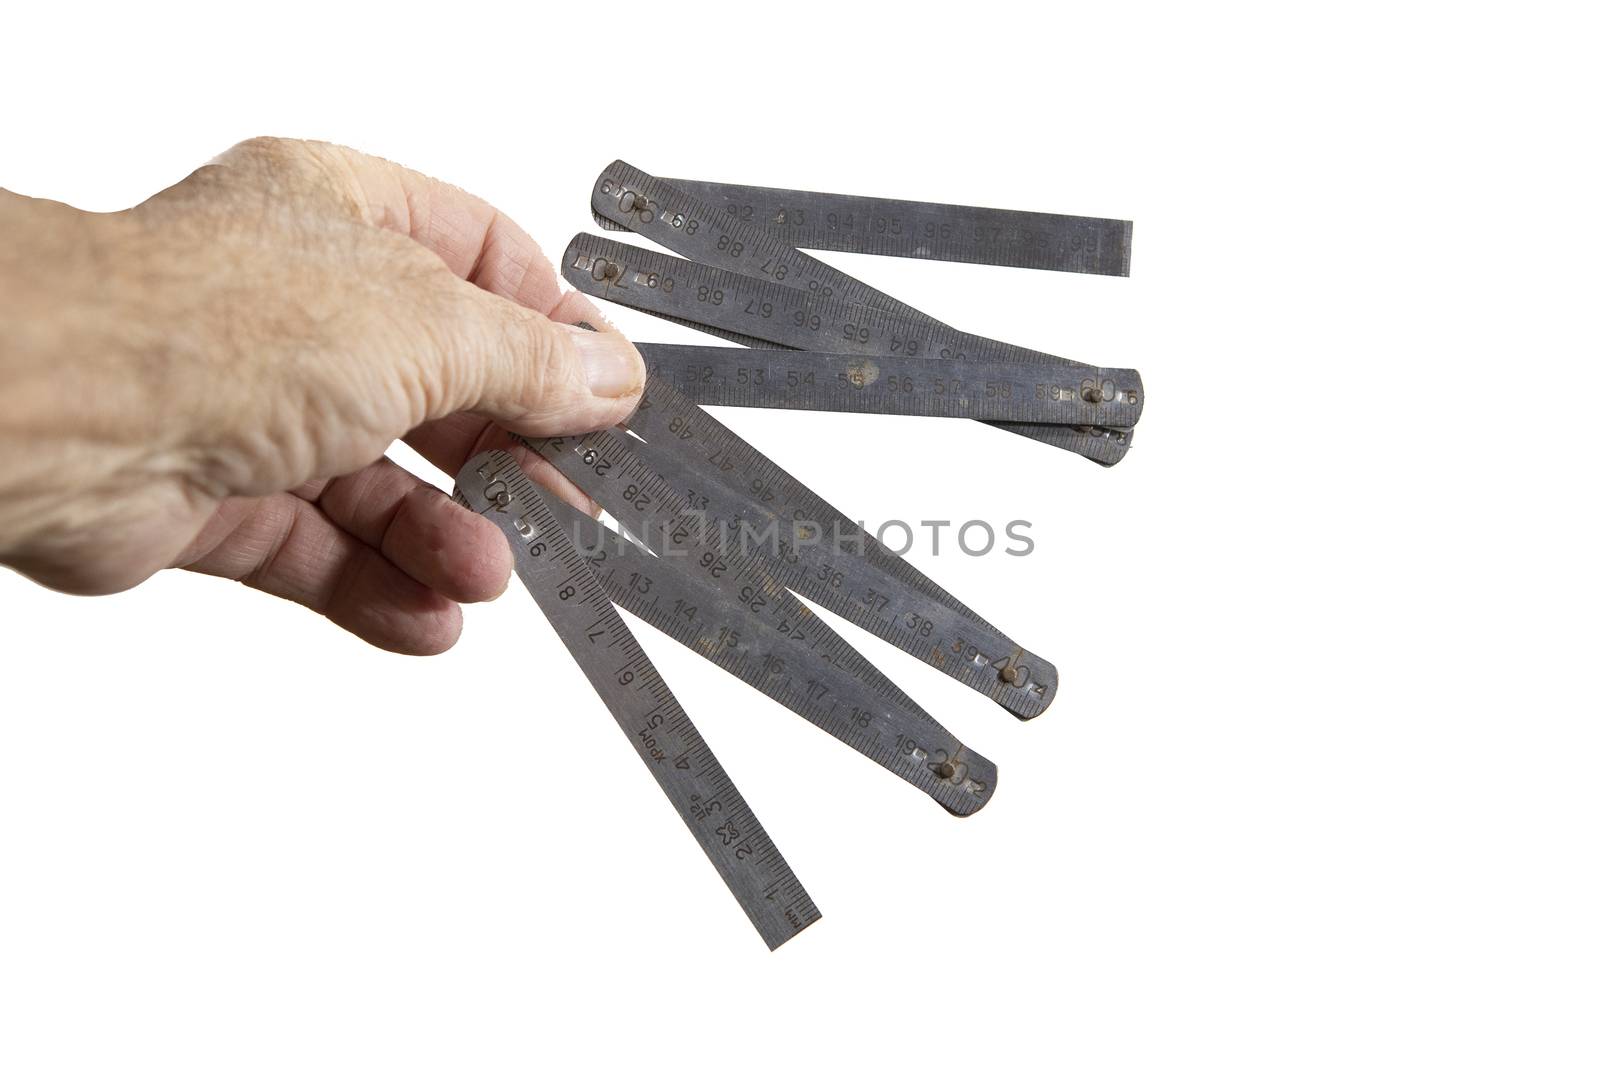 Folding Metal Meter against white background by ben44